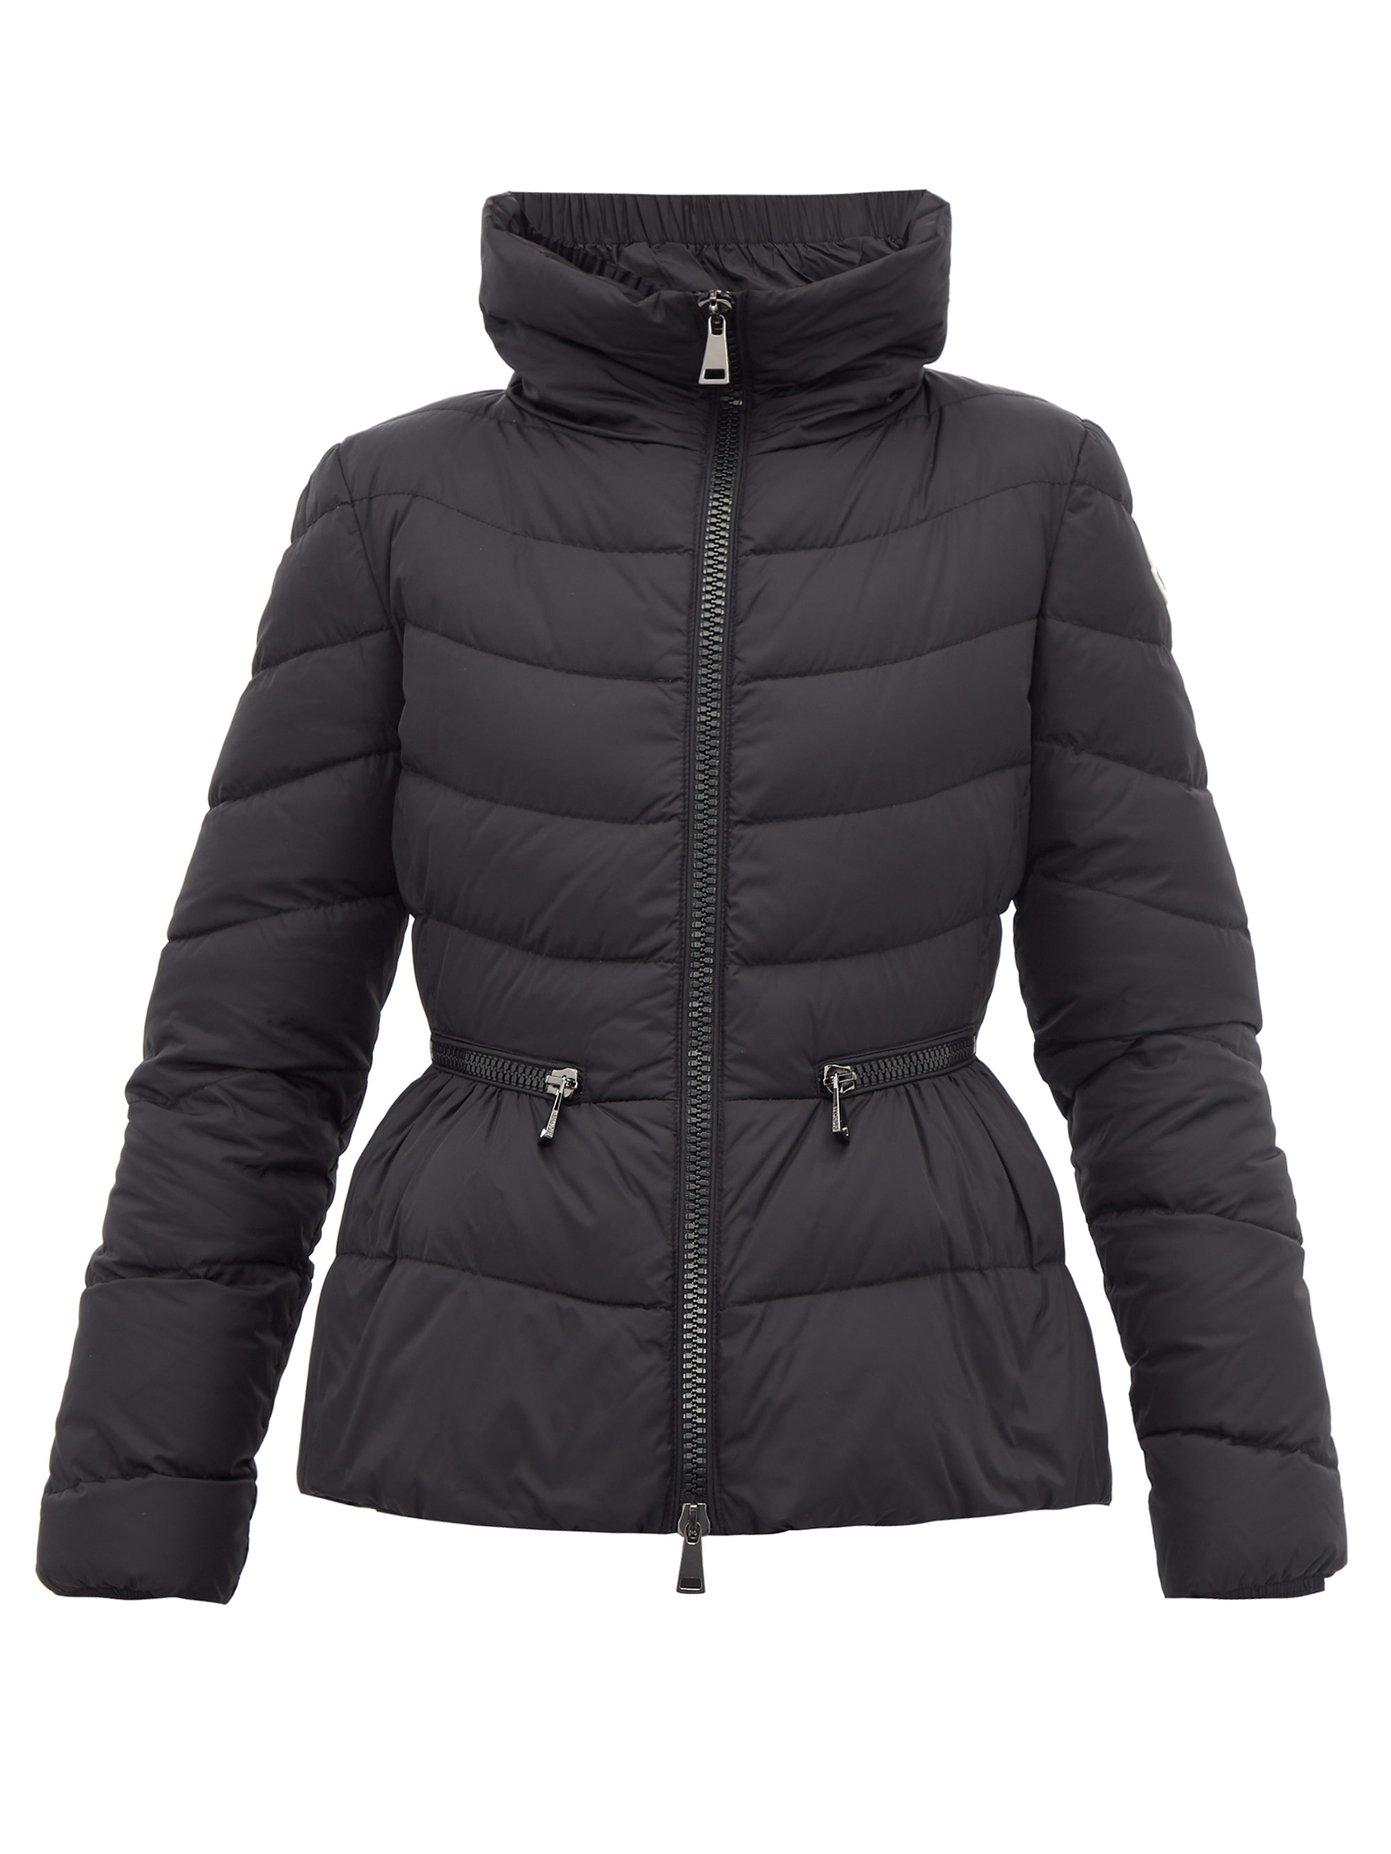 moncler fitted women's jacket